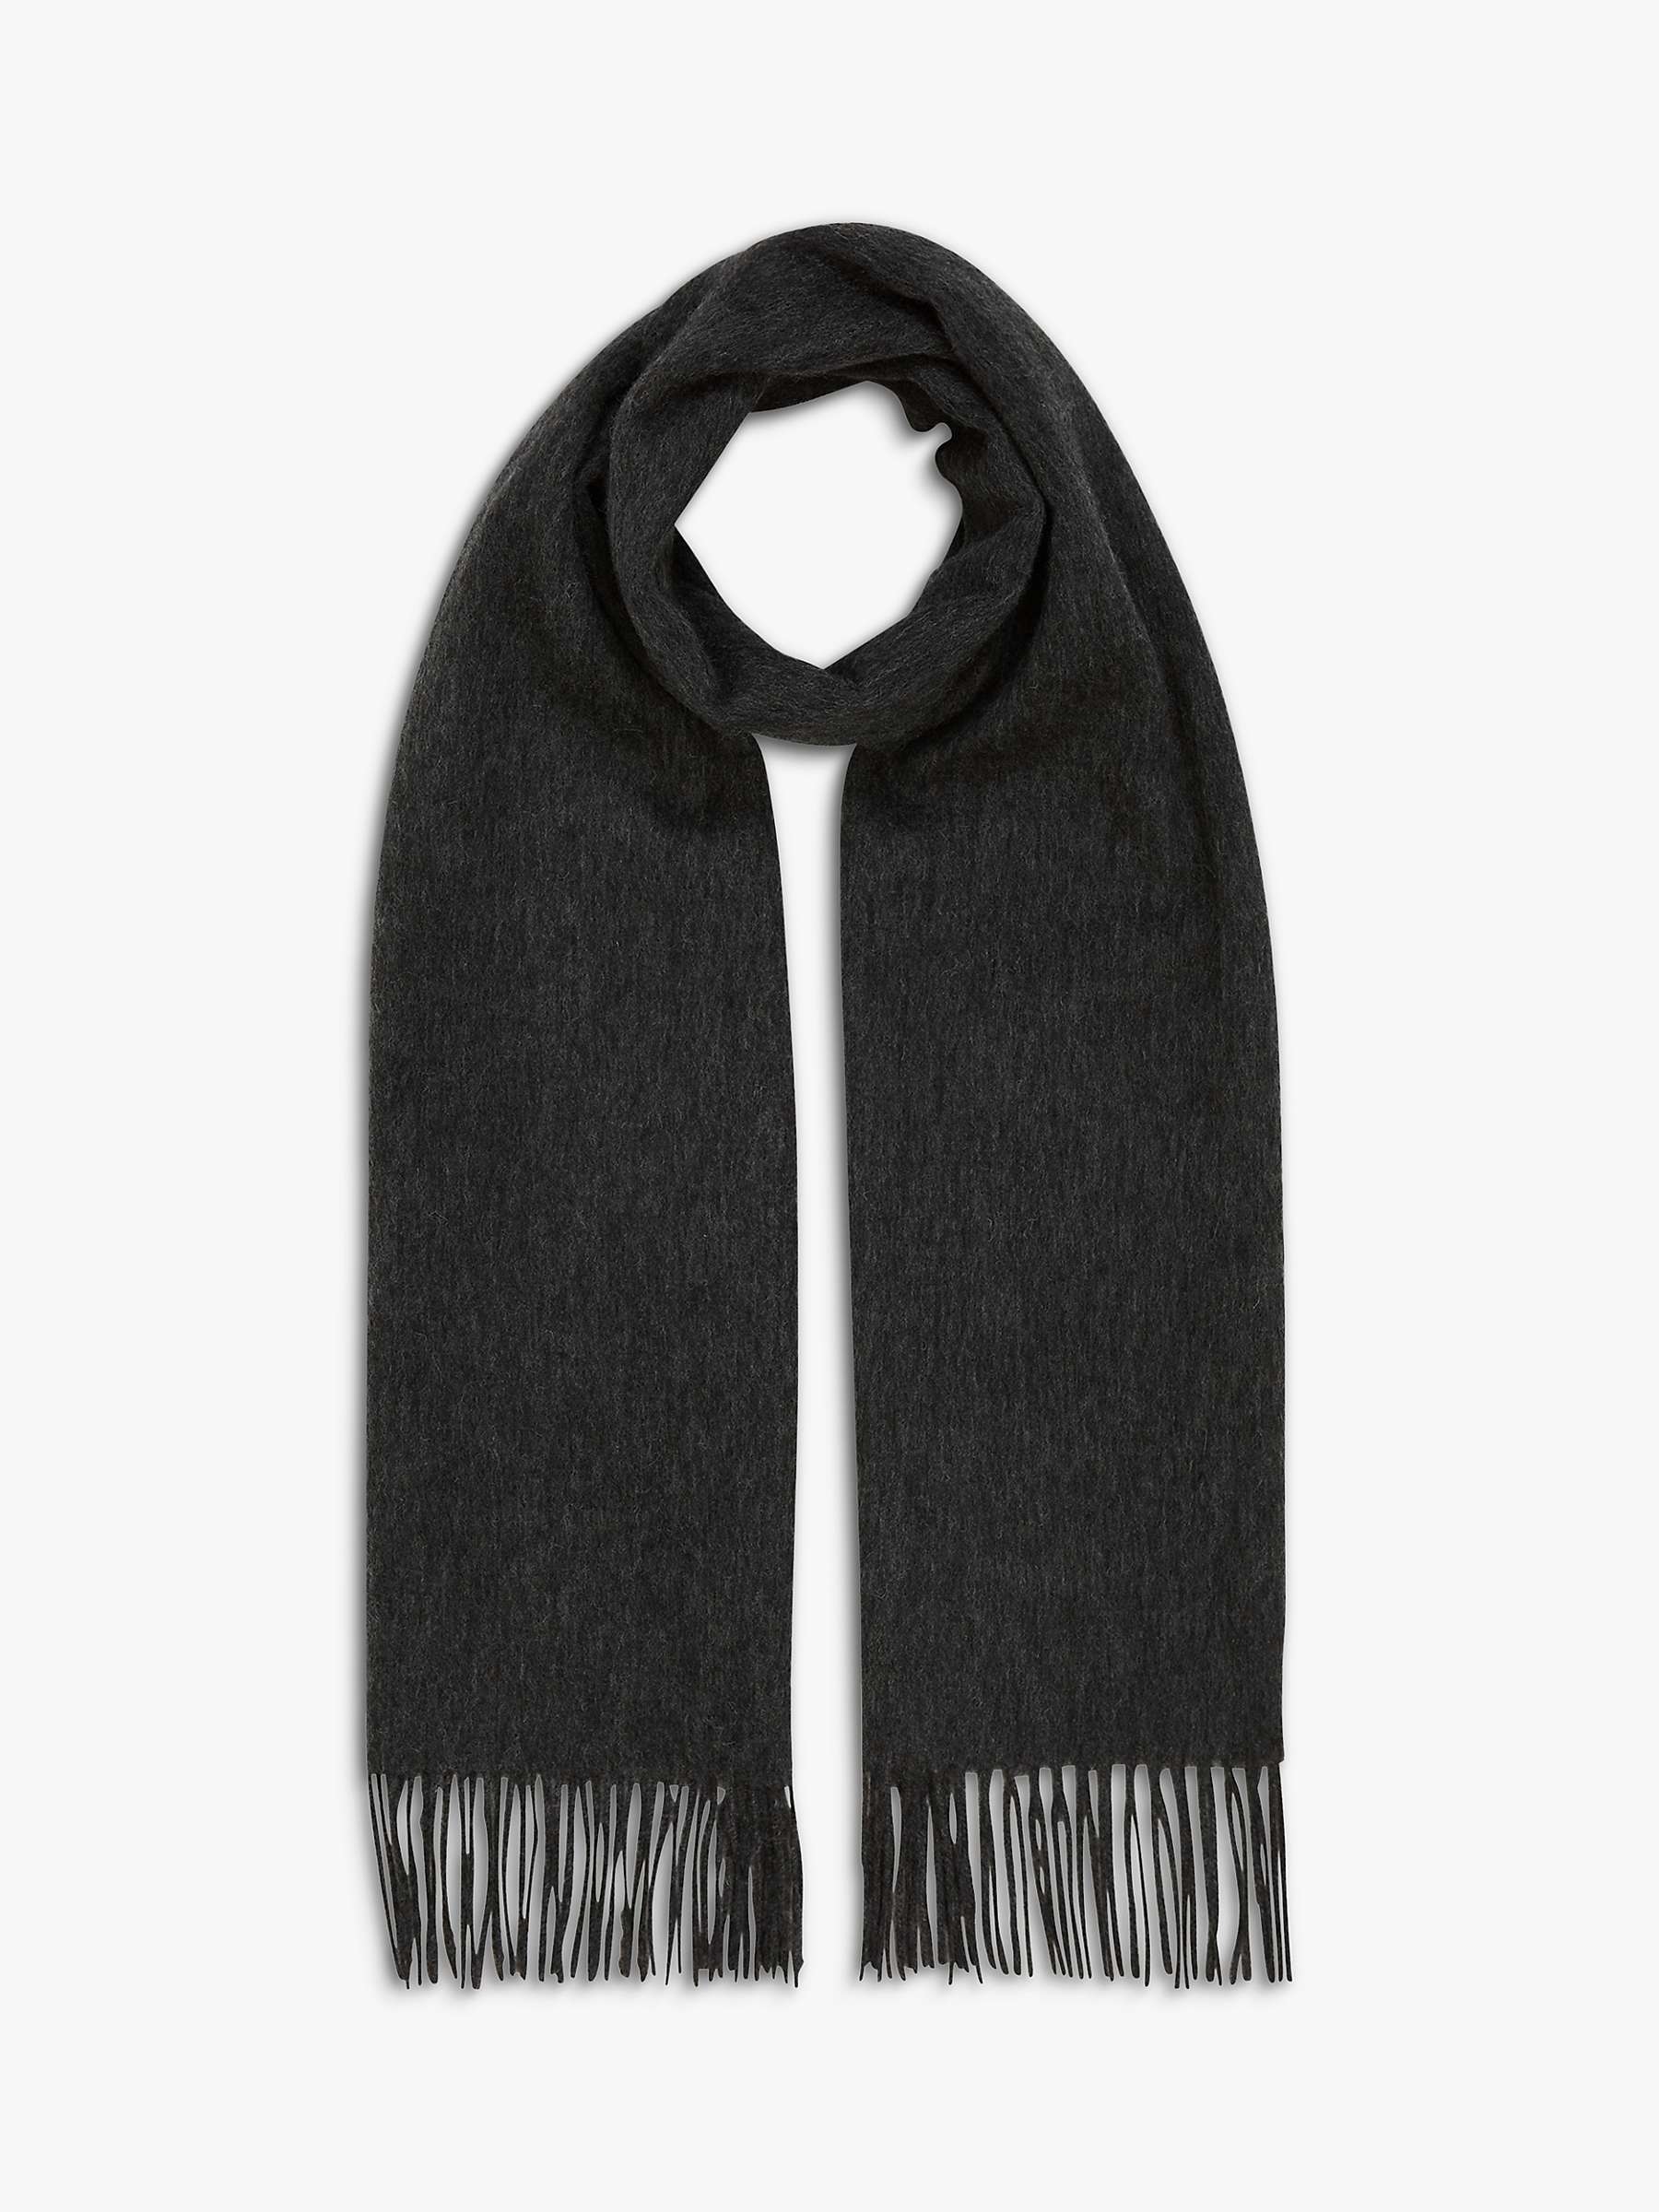 Reiss Picton Cashmere Blend Scarf, Charcoal at John Lewis & Partners